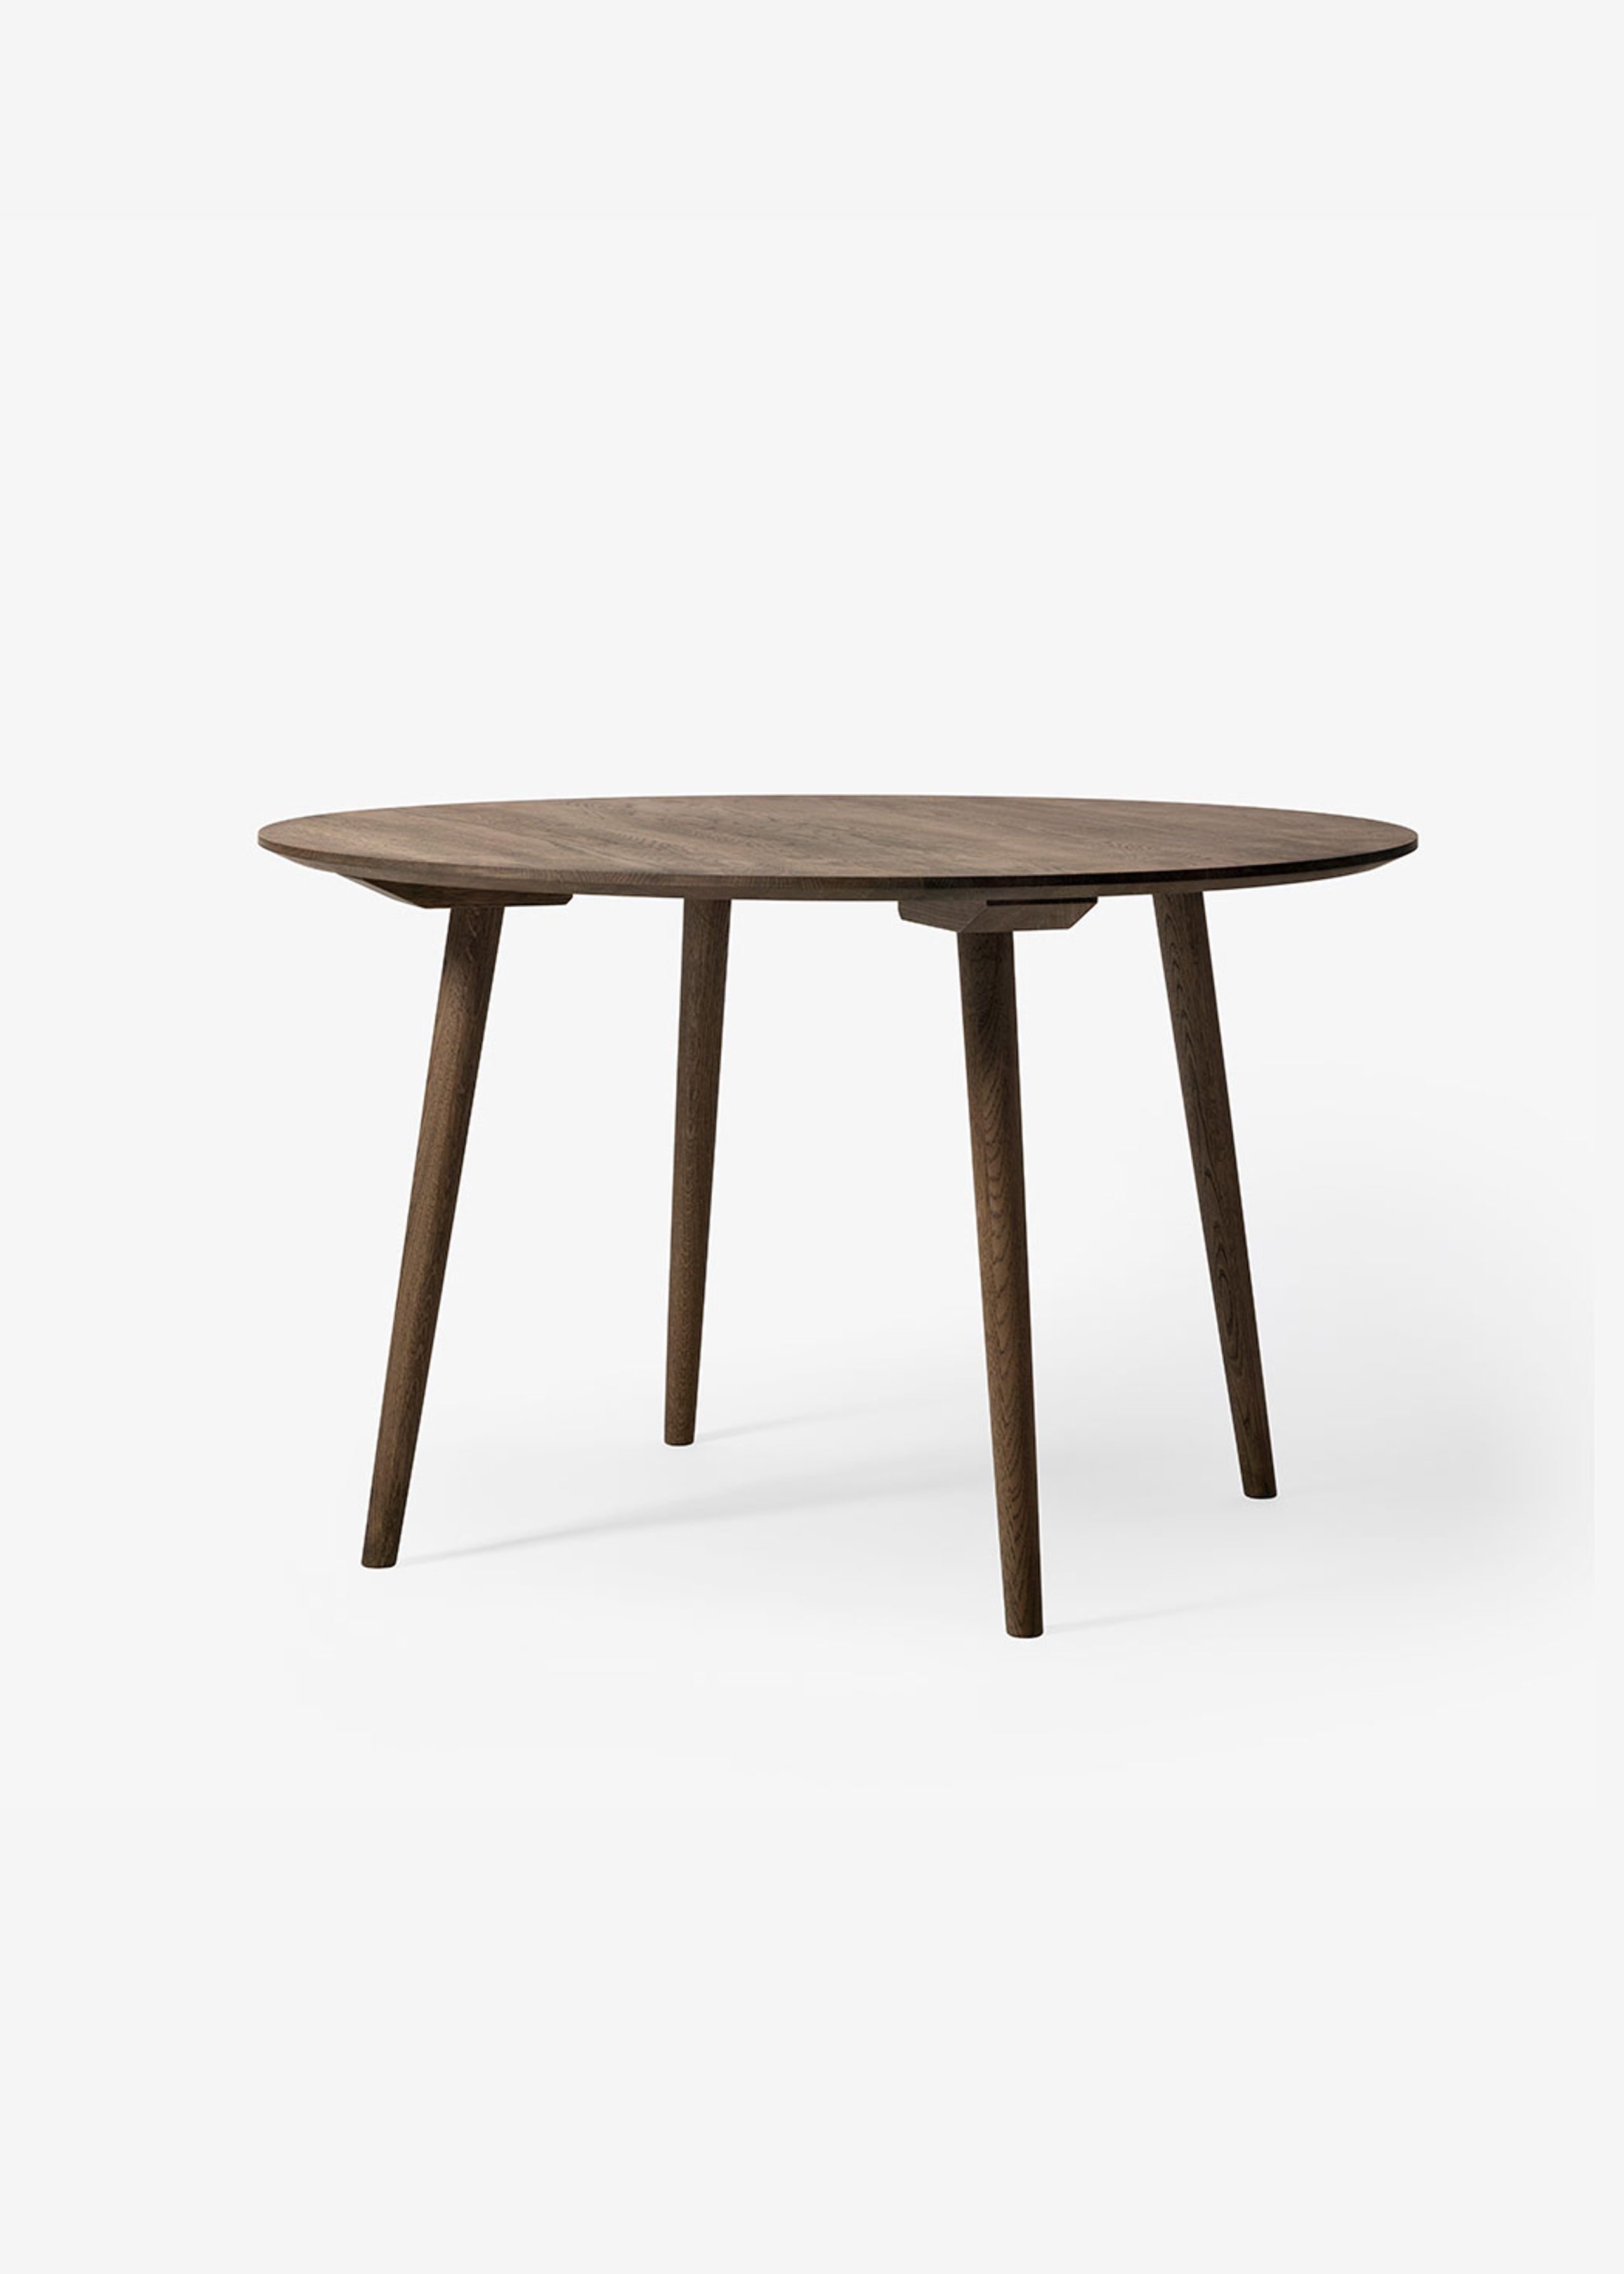 &tradition - Conselho - In Between Table- SK4 - Smoked oiled oak